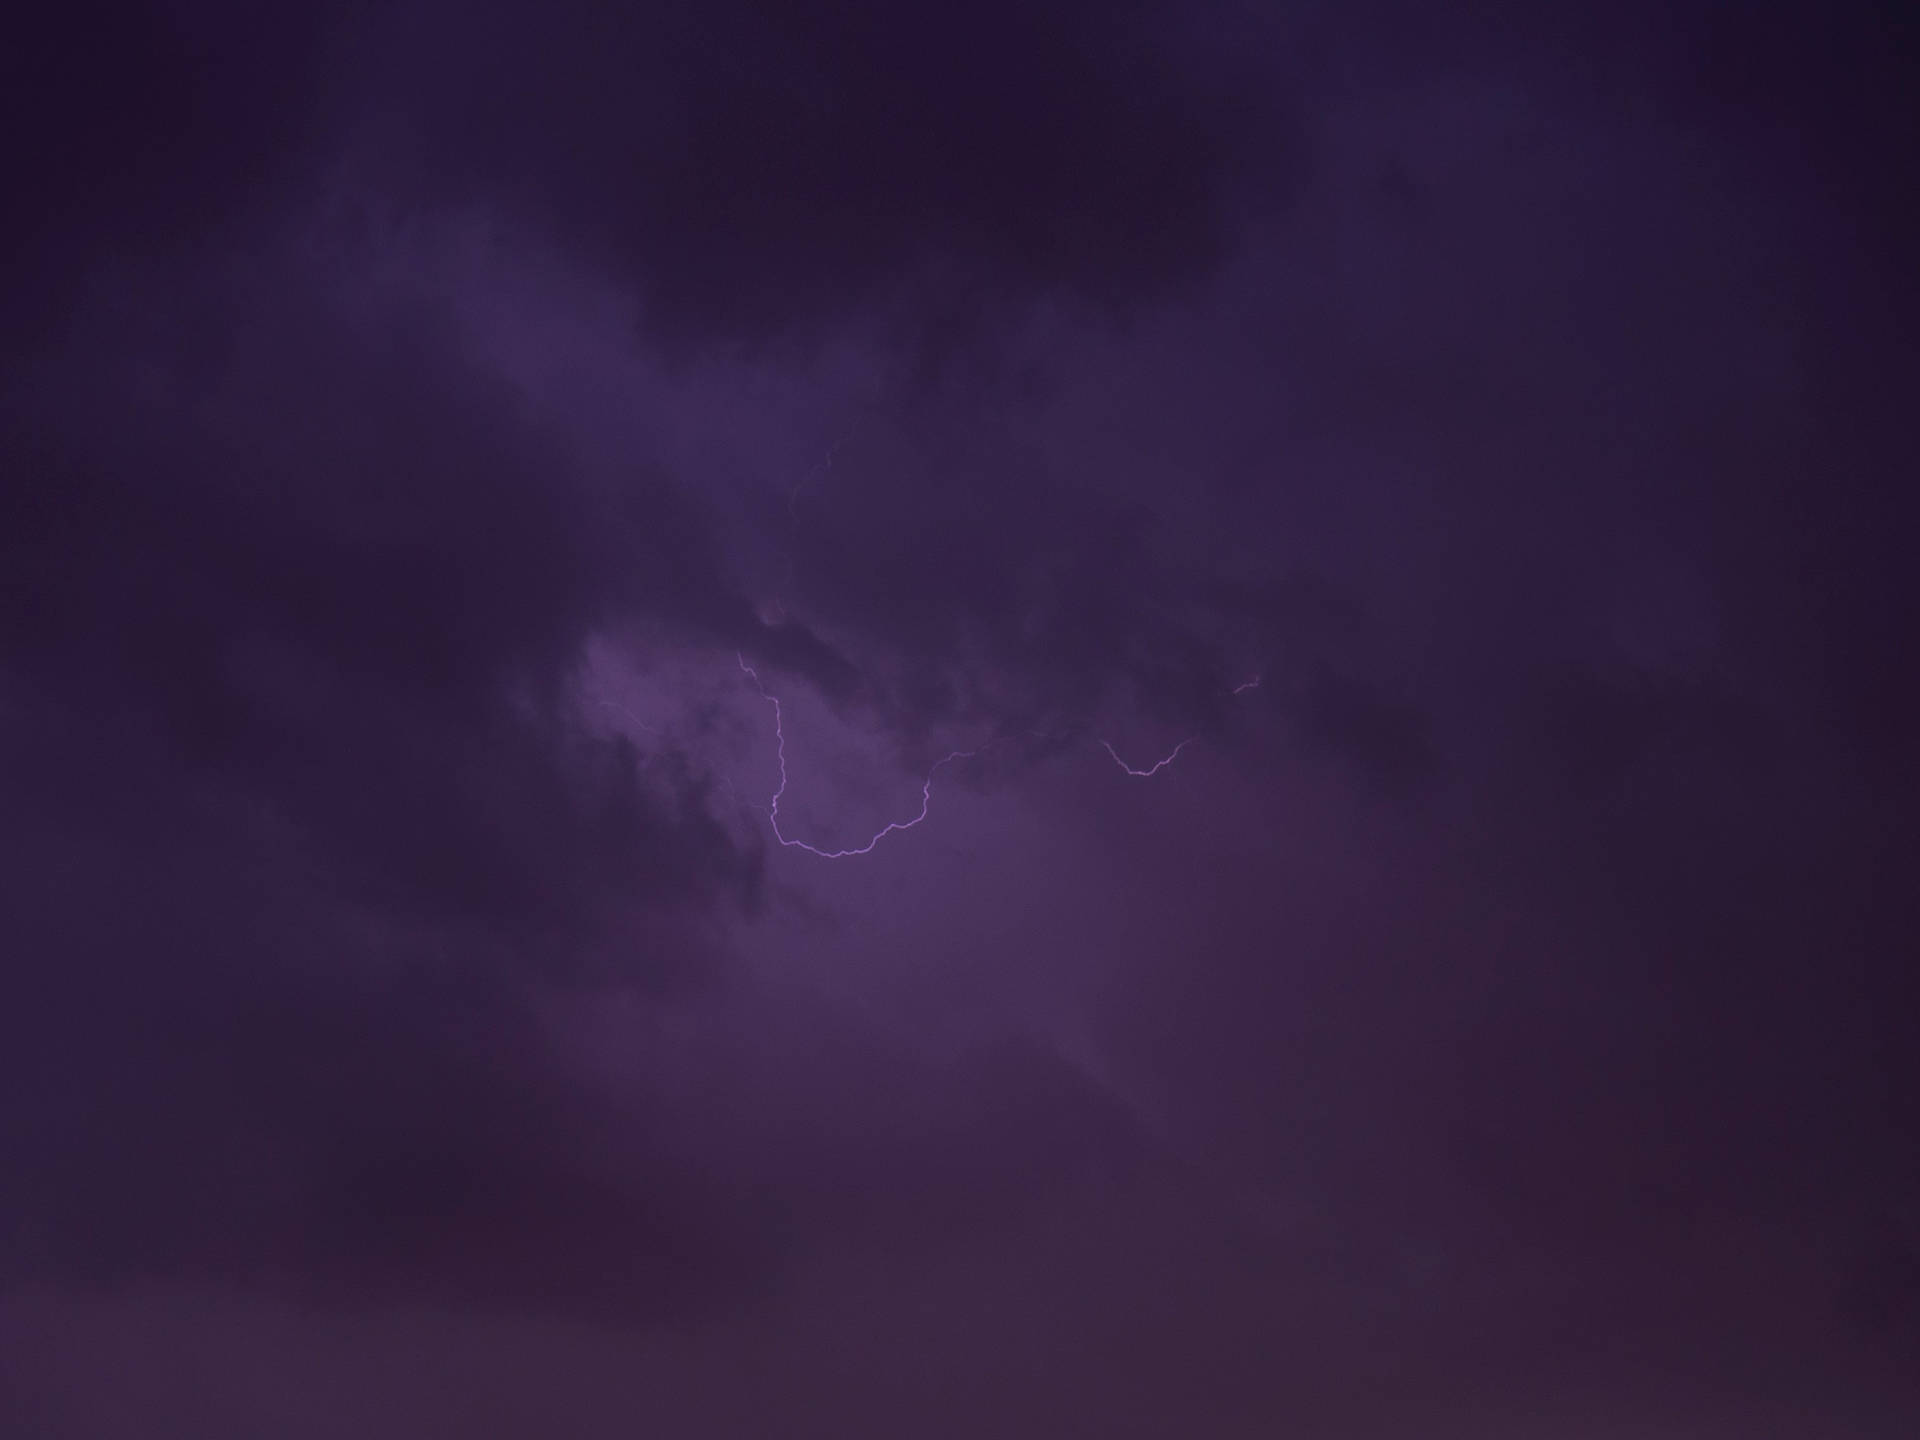 Lightning 3034X2275 Wallpaper and Background Image